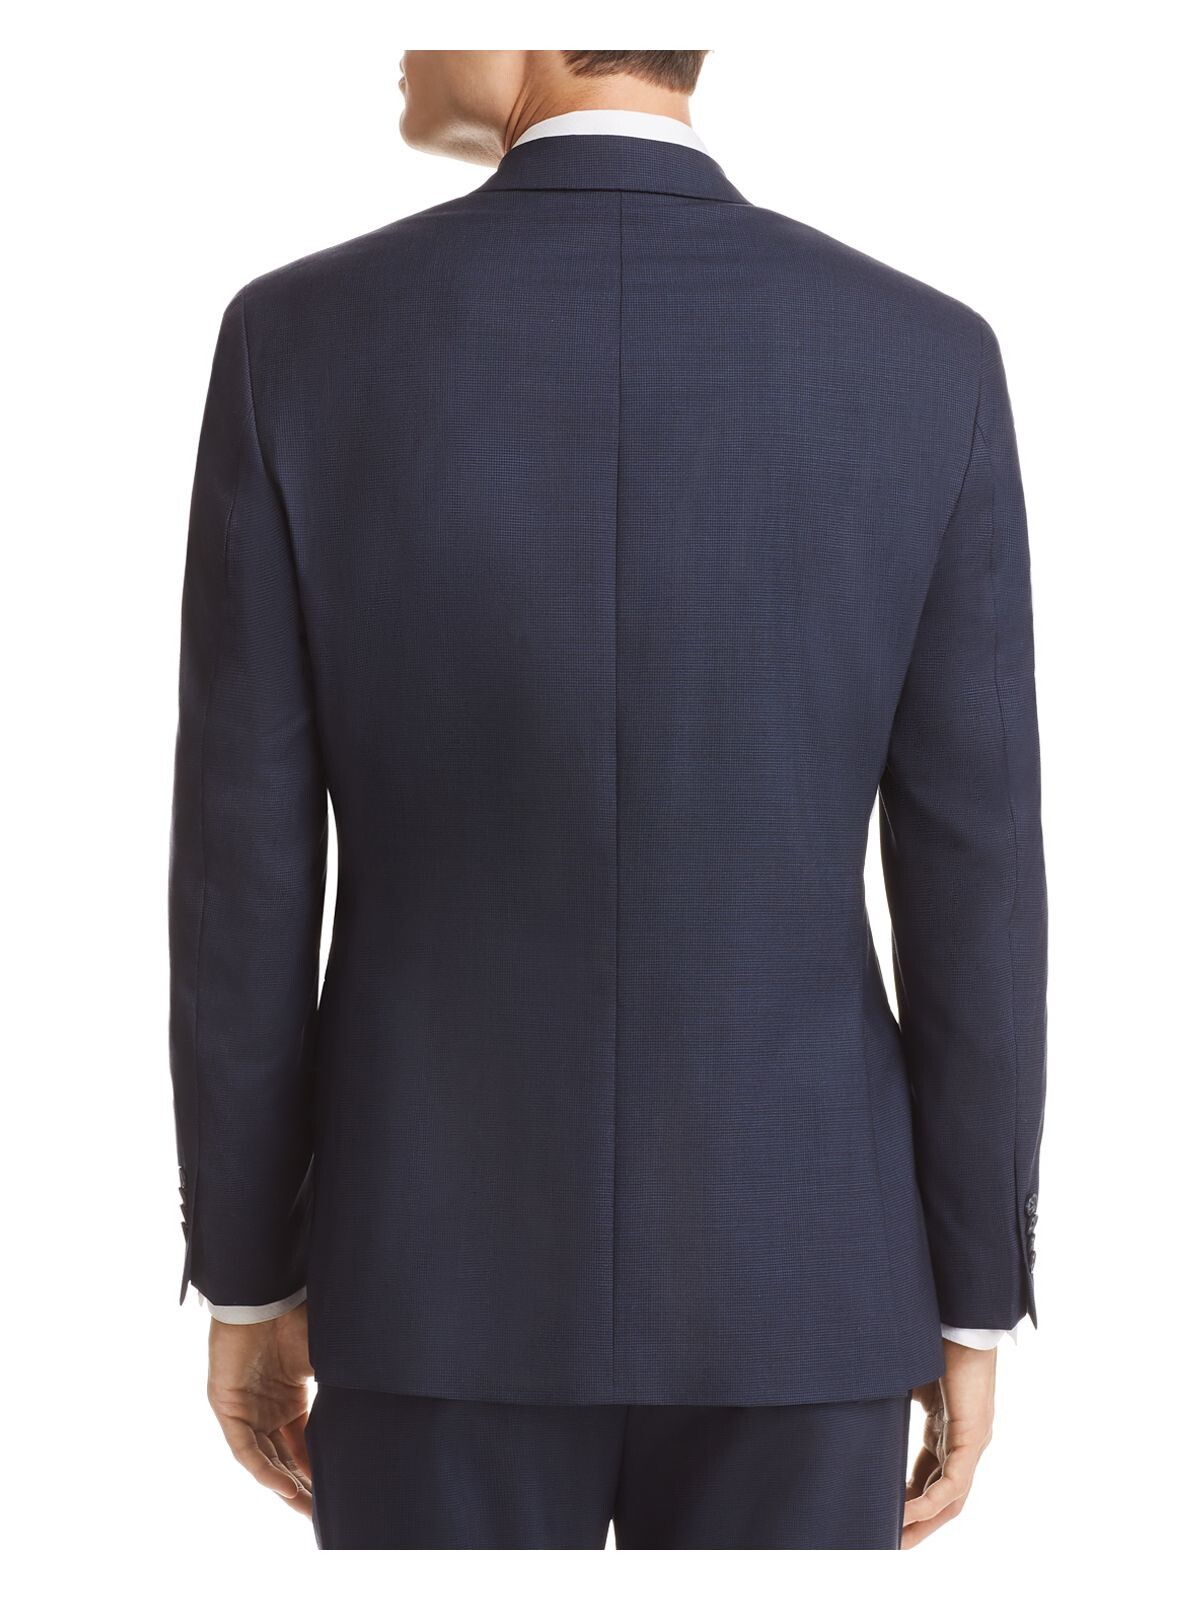 MICHAEL KORS Mens Navy Single Breasted, Stretch, Classic Fit Wool Blend Suit Separate Blazer Jacket 42L